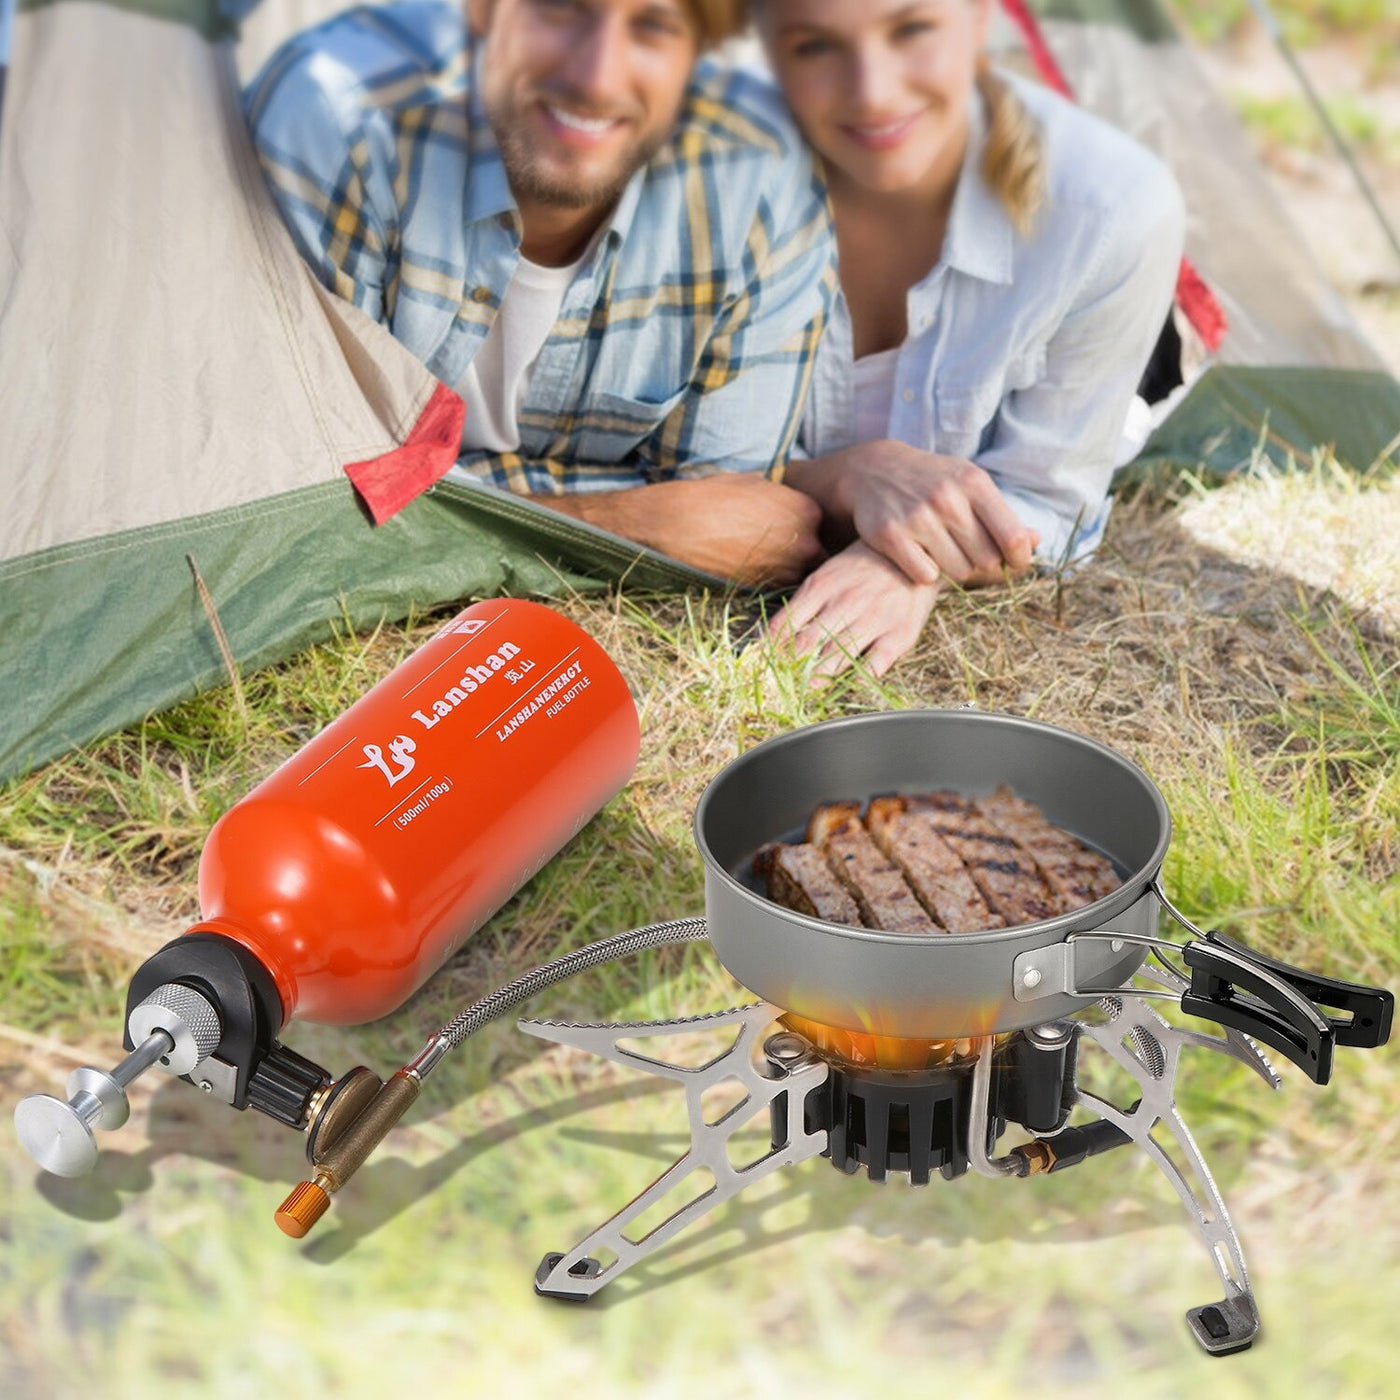 Multi Fuel Stove For Outdoor Use